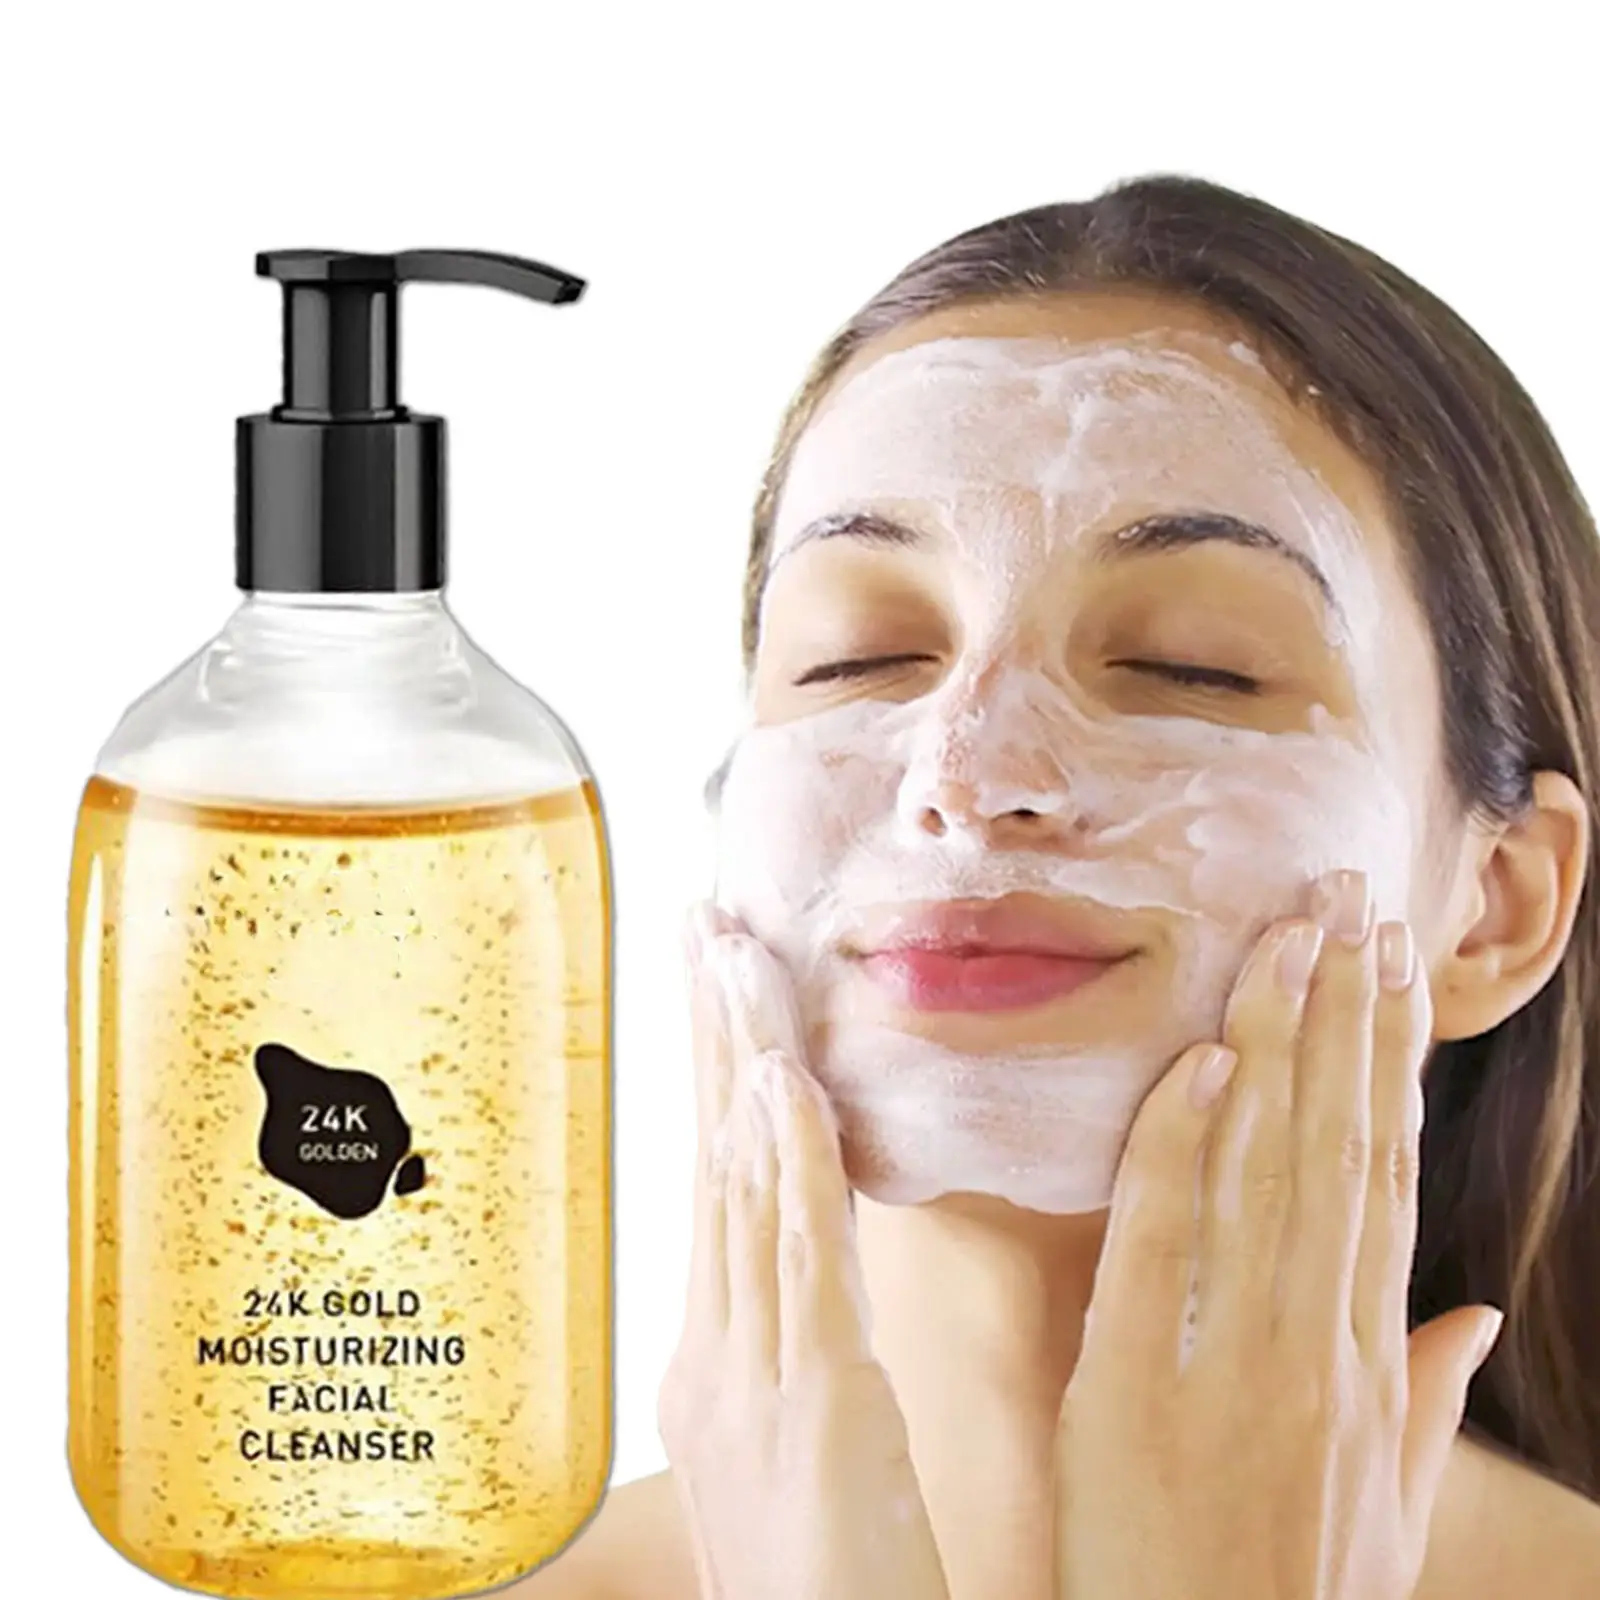 Halal cosmetic face cleanser 24K gold moisturizing cleanser moisturizer facial cleanser